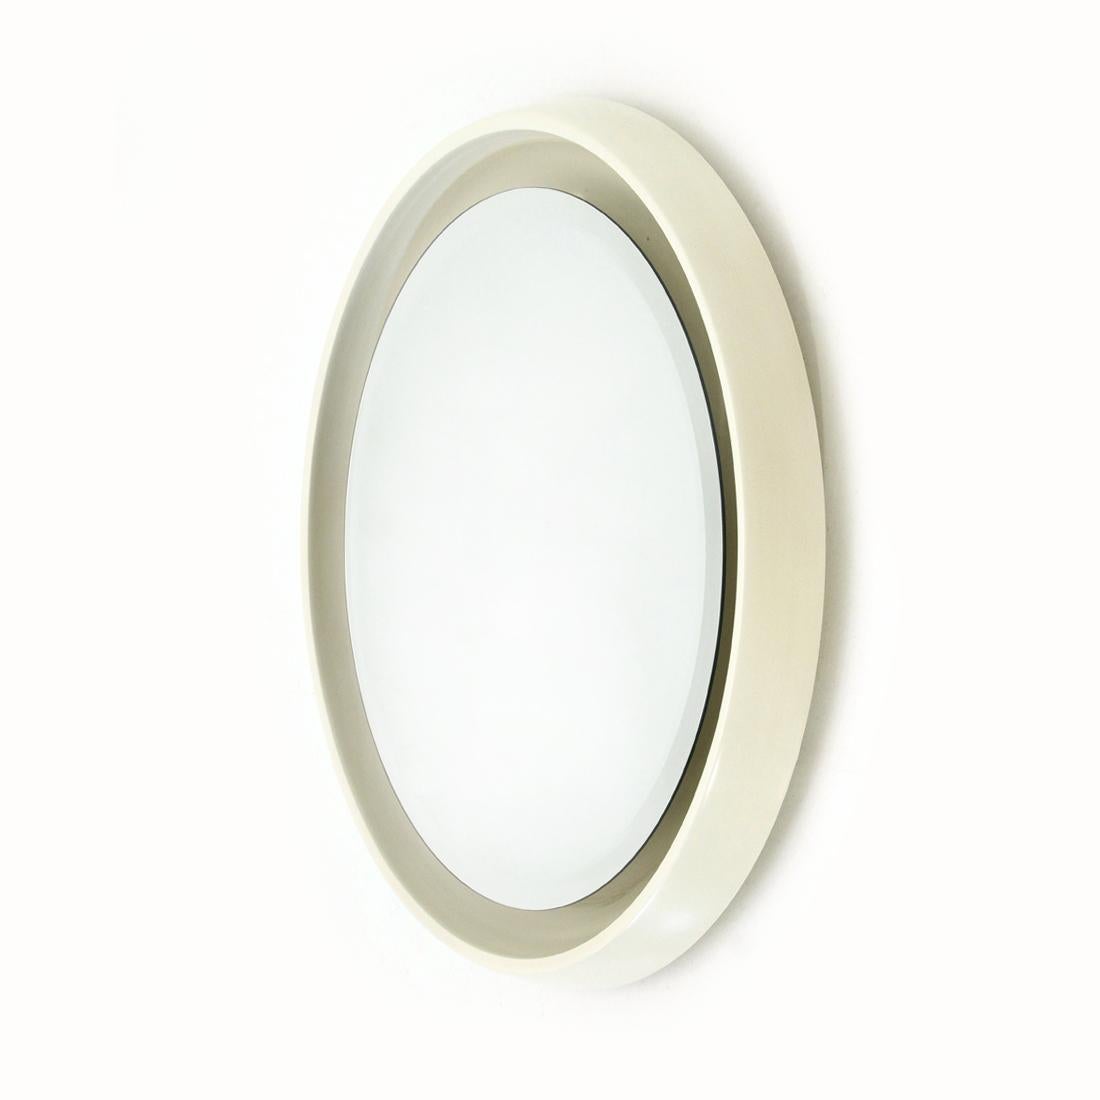 Mid-Century Modern Round Lighted Mirror in White Lacquered Wood by CRB, 1960s For Sale